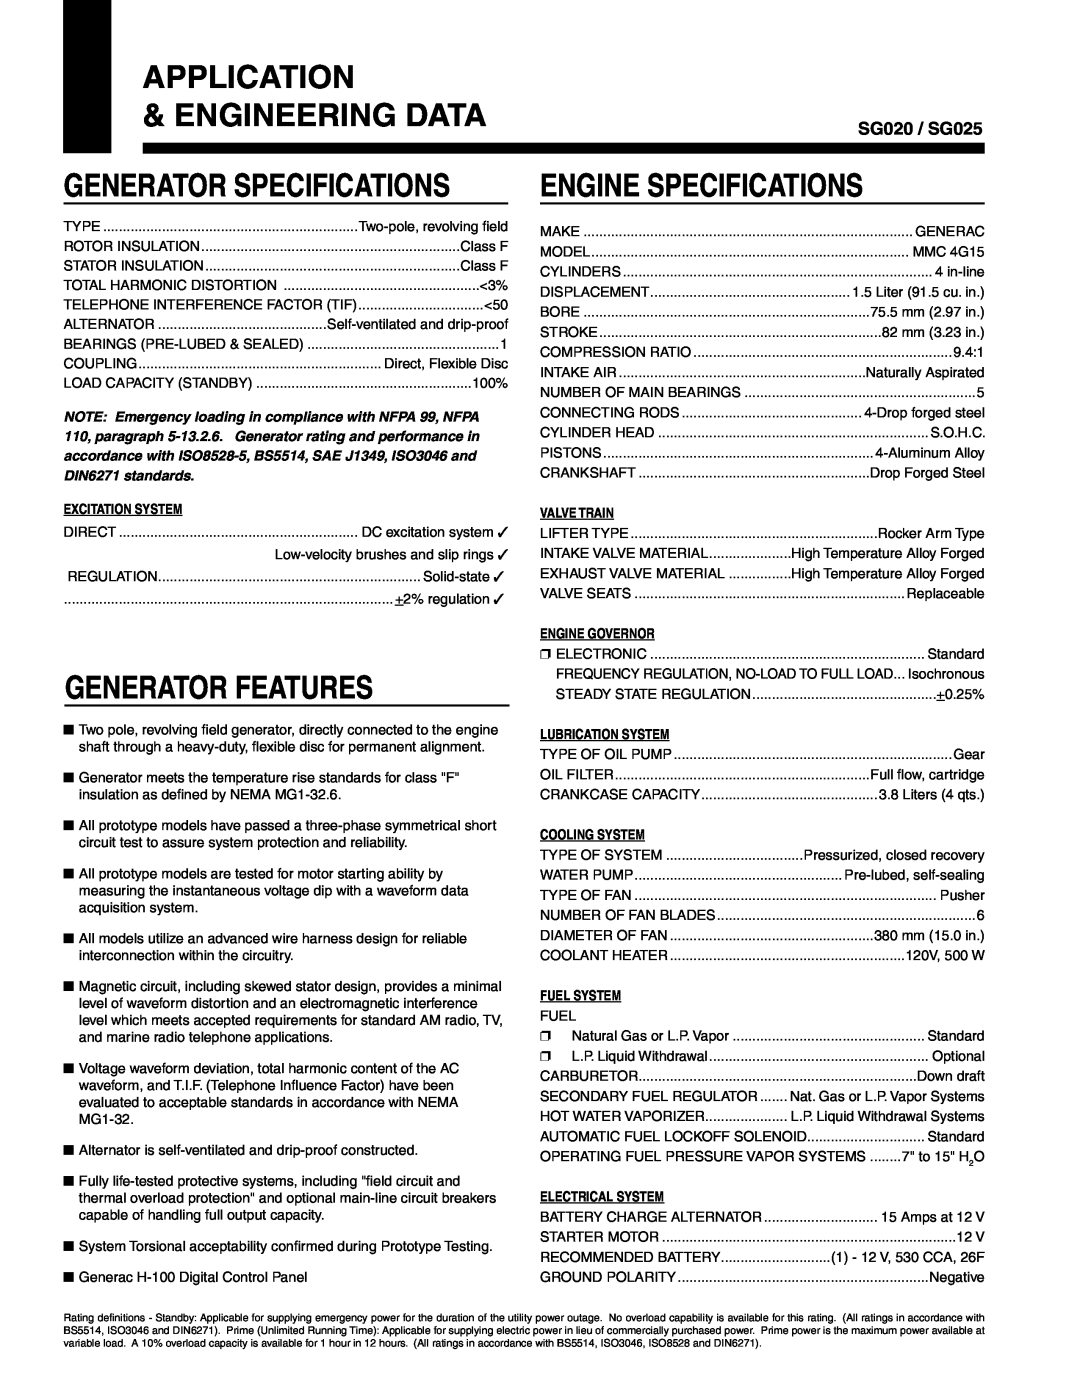 Generac Power Systems manual Application, Engineering Data, Generator Specifications, Generator Features, SG020 / SG025 